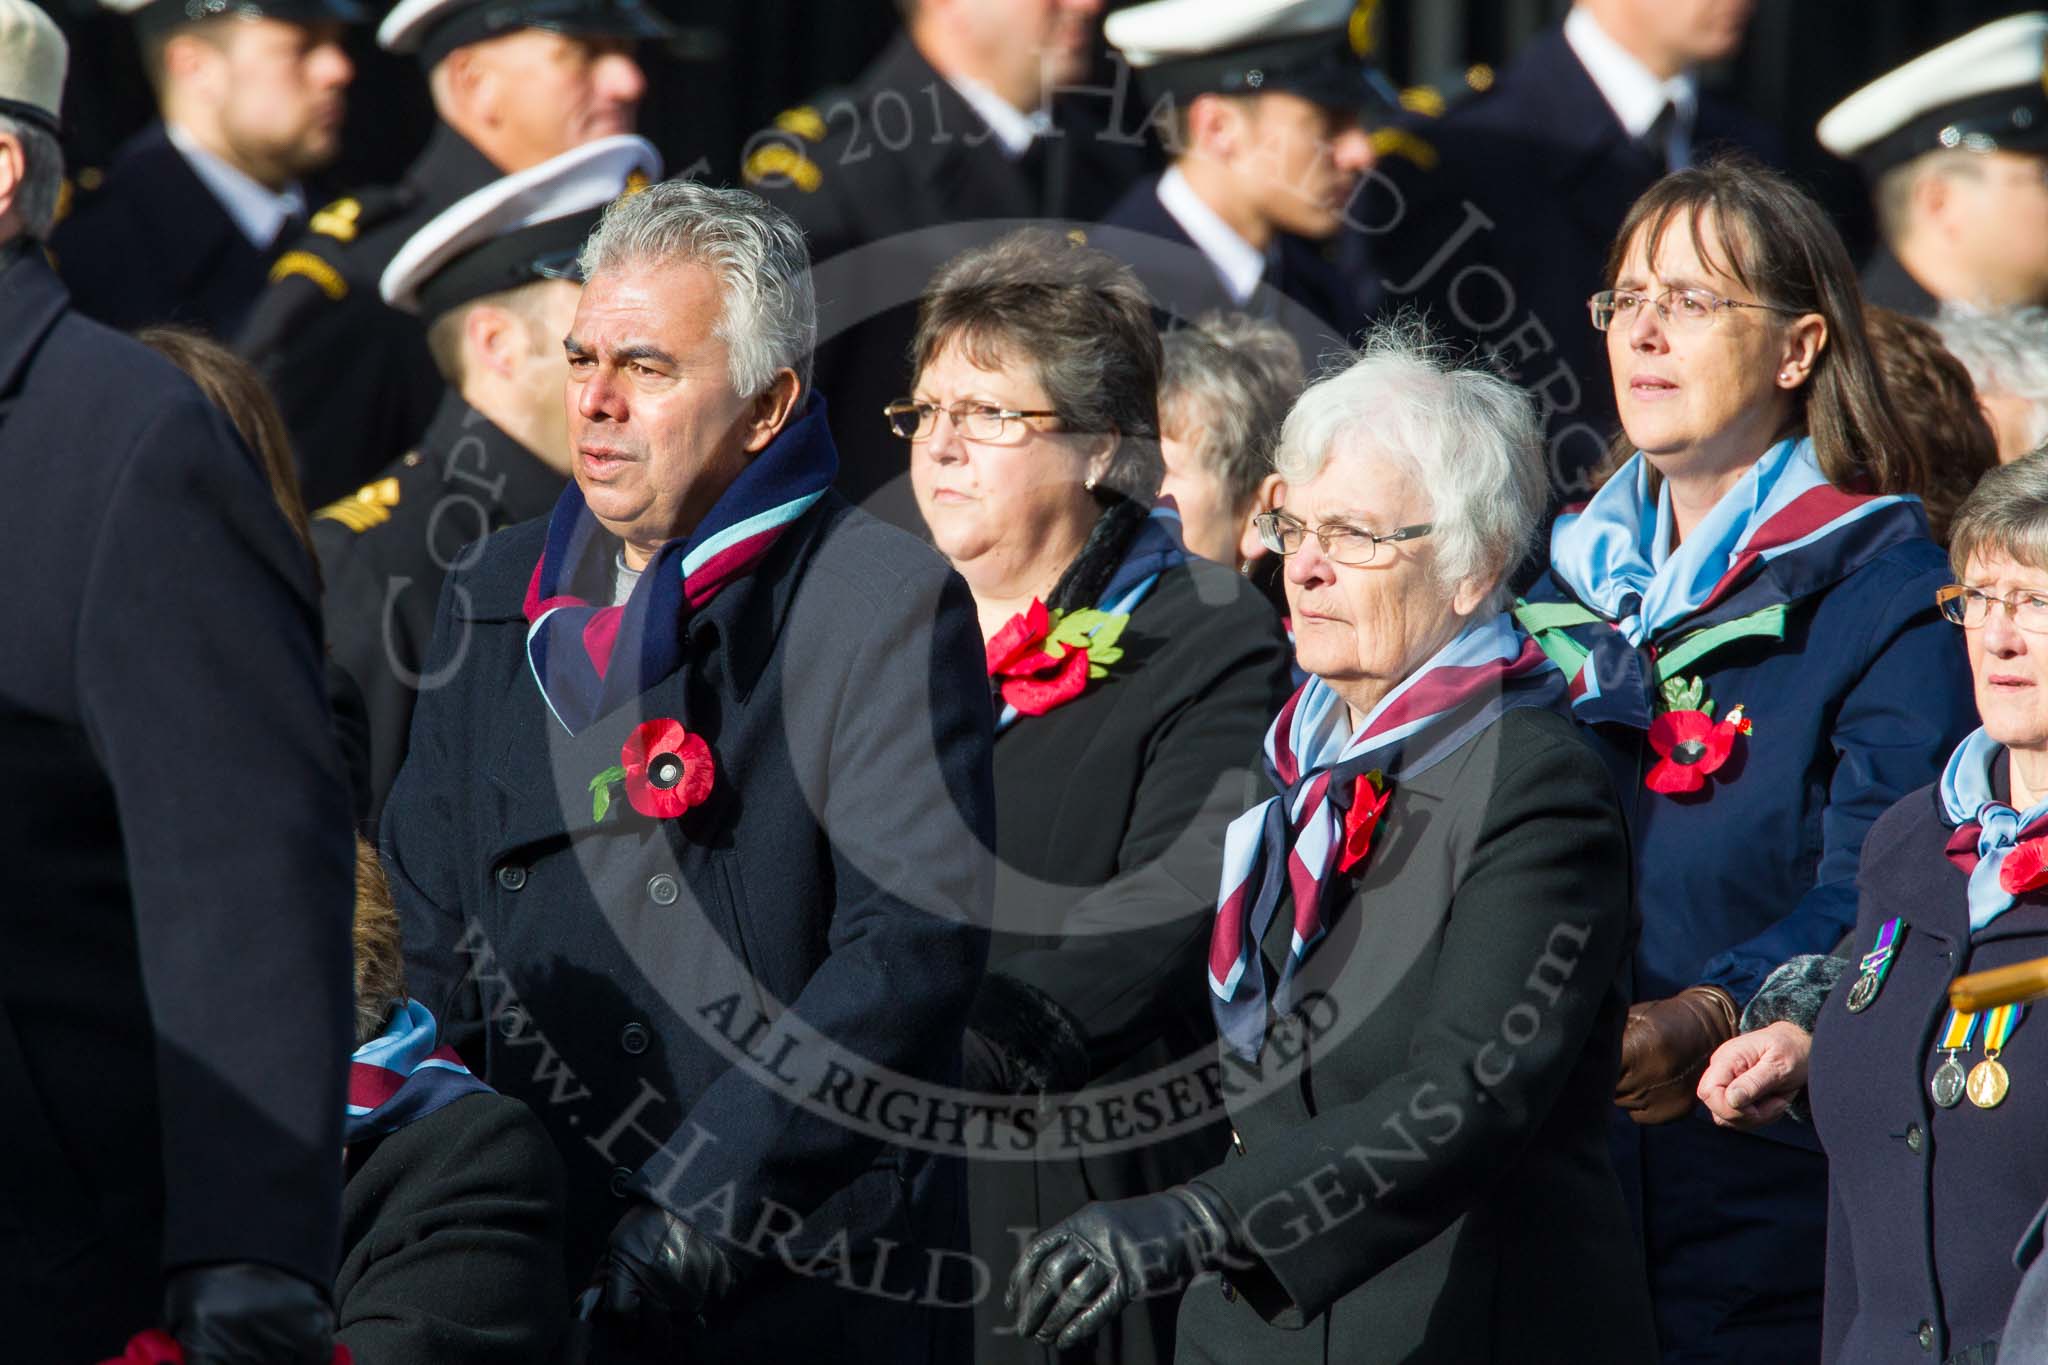 Remembrance Sunday at the Cenotaph in London 2014: Group C23 - Princess Mary's Royal Air Force Nursing Service
Association.
Press stand opposite the Foreign Office building, Whitehall, London SW1,
London,
Greater London,
United Kingdom,
on 09 November 2014 at 11:41, image #191